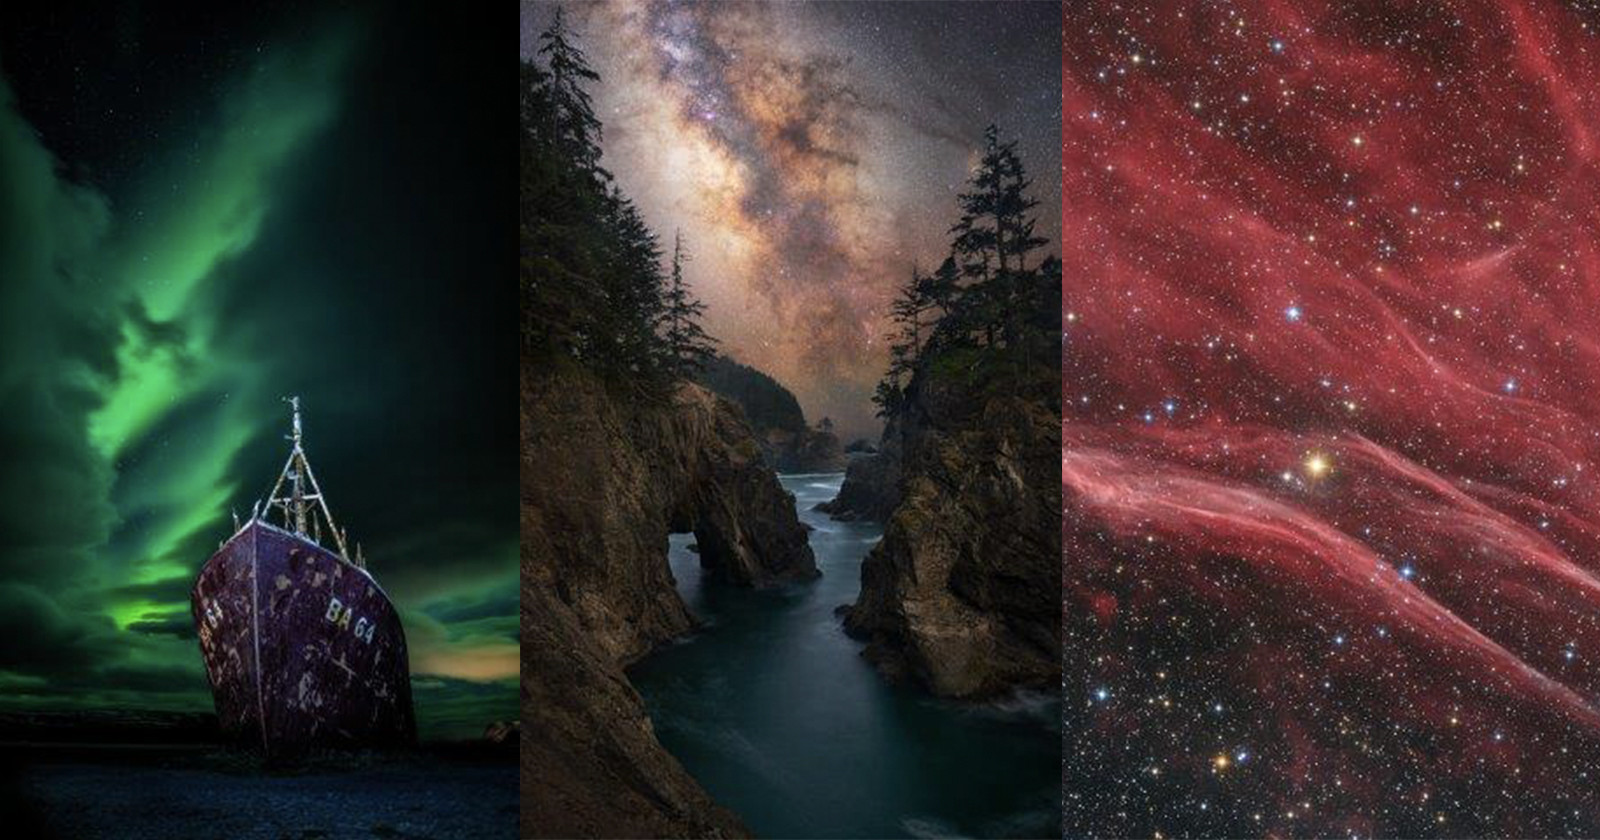  photos from astronomy photographer year 